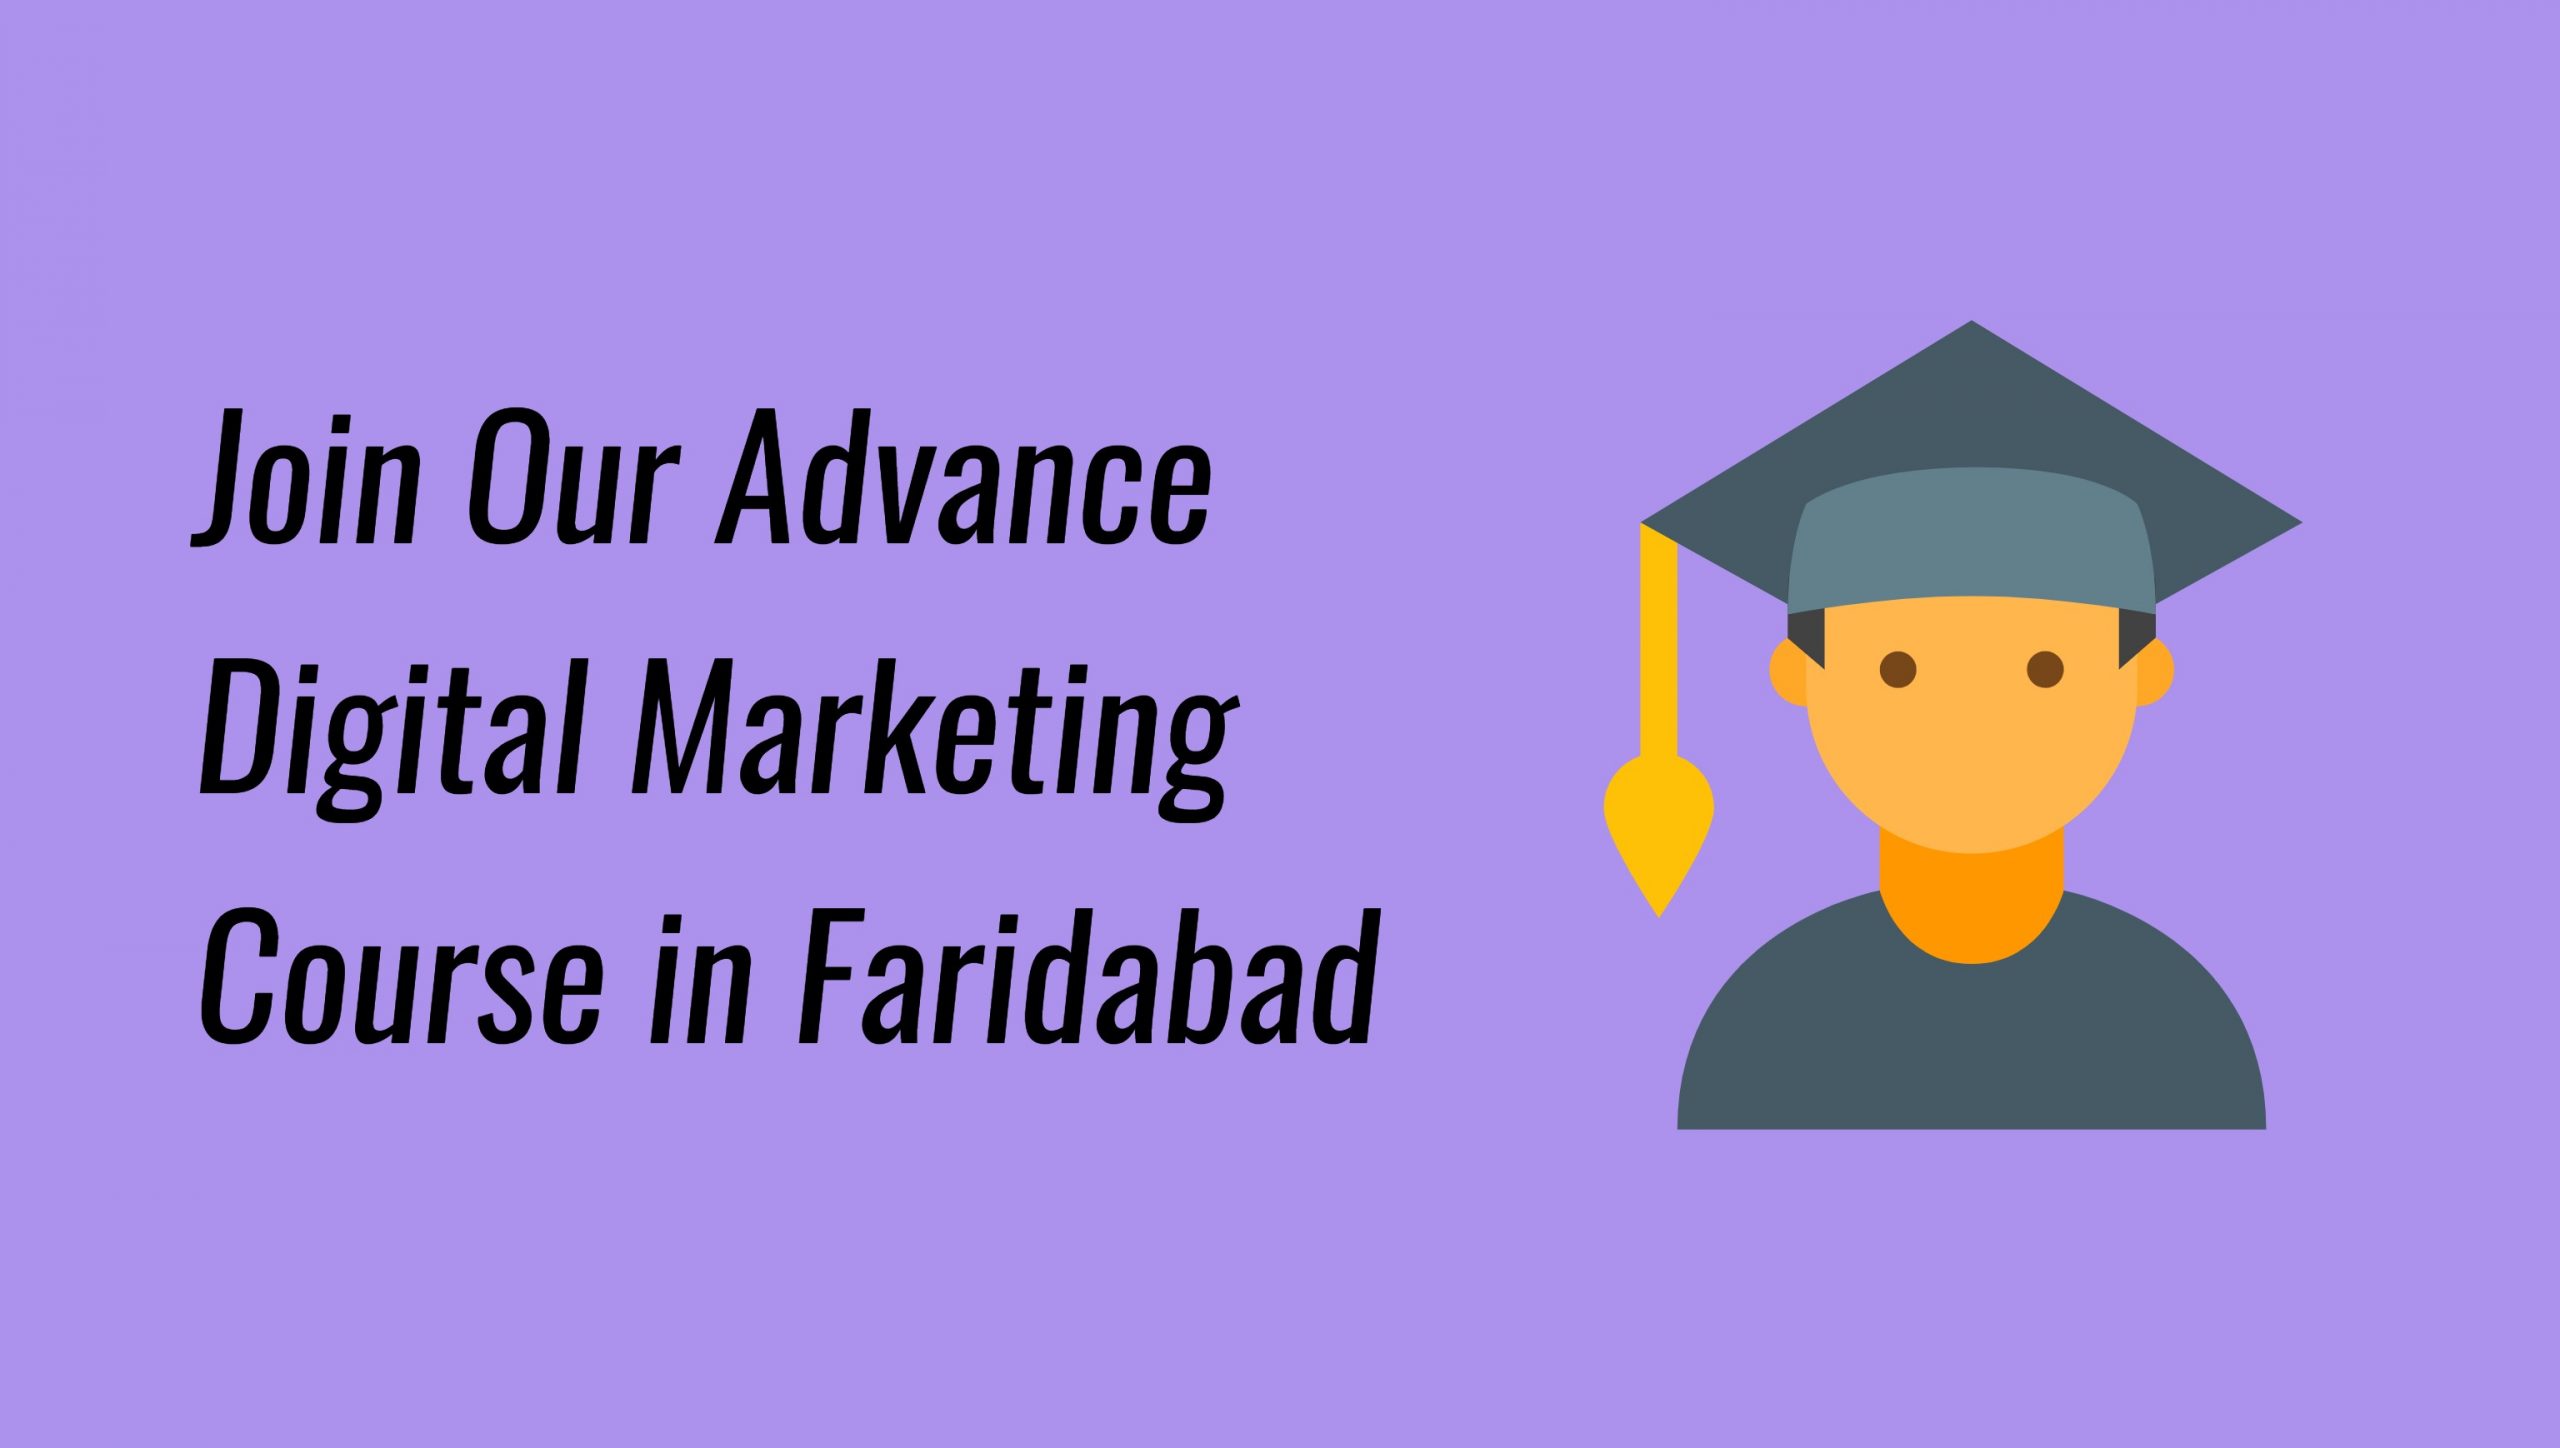 Join Our Advance Digital Marketing Course in Faridabad